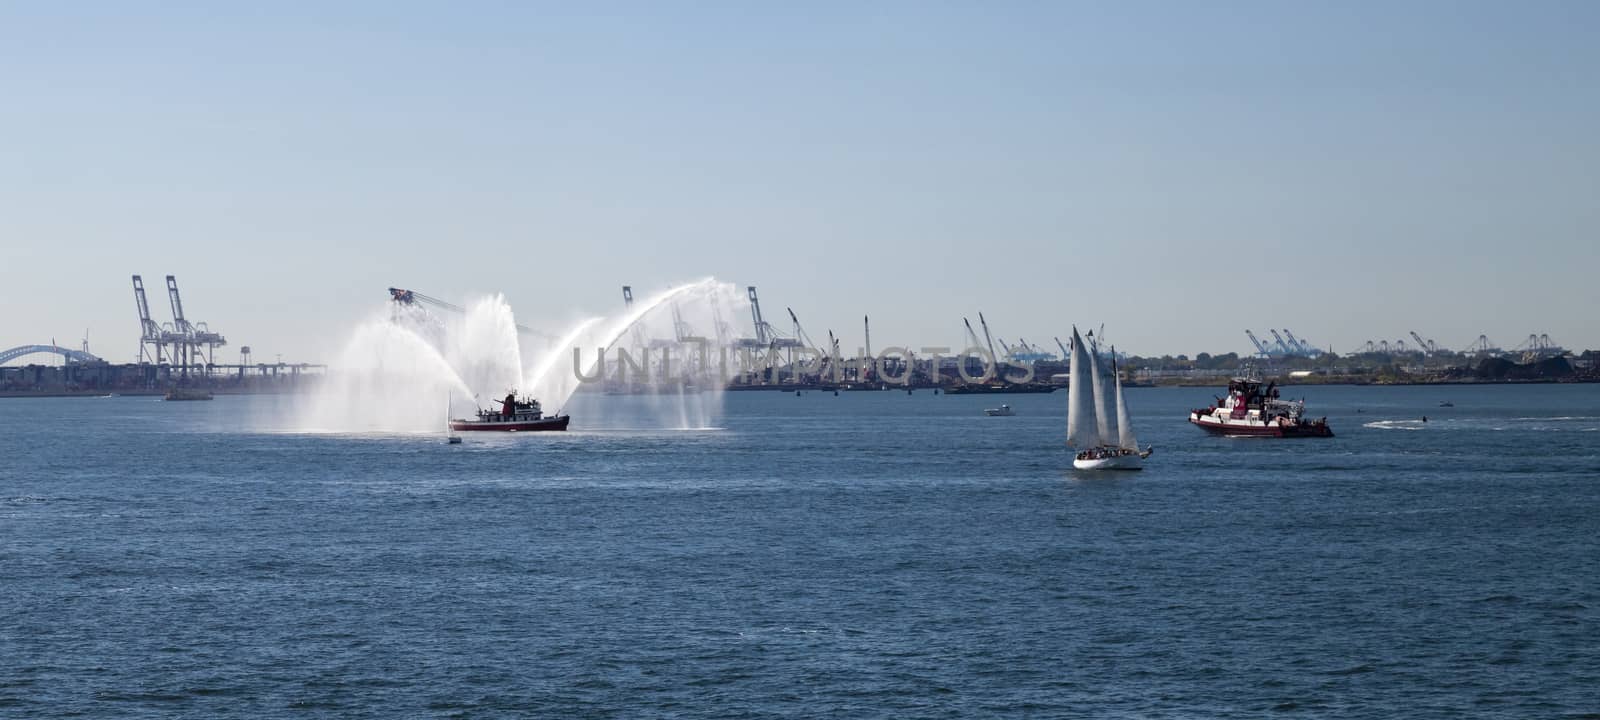 New York, USA, SEPT 27, 2014: The New York City Fire Department Boat practices maneuvers  in the Hudson River off New York City